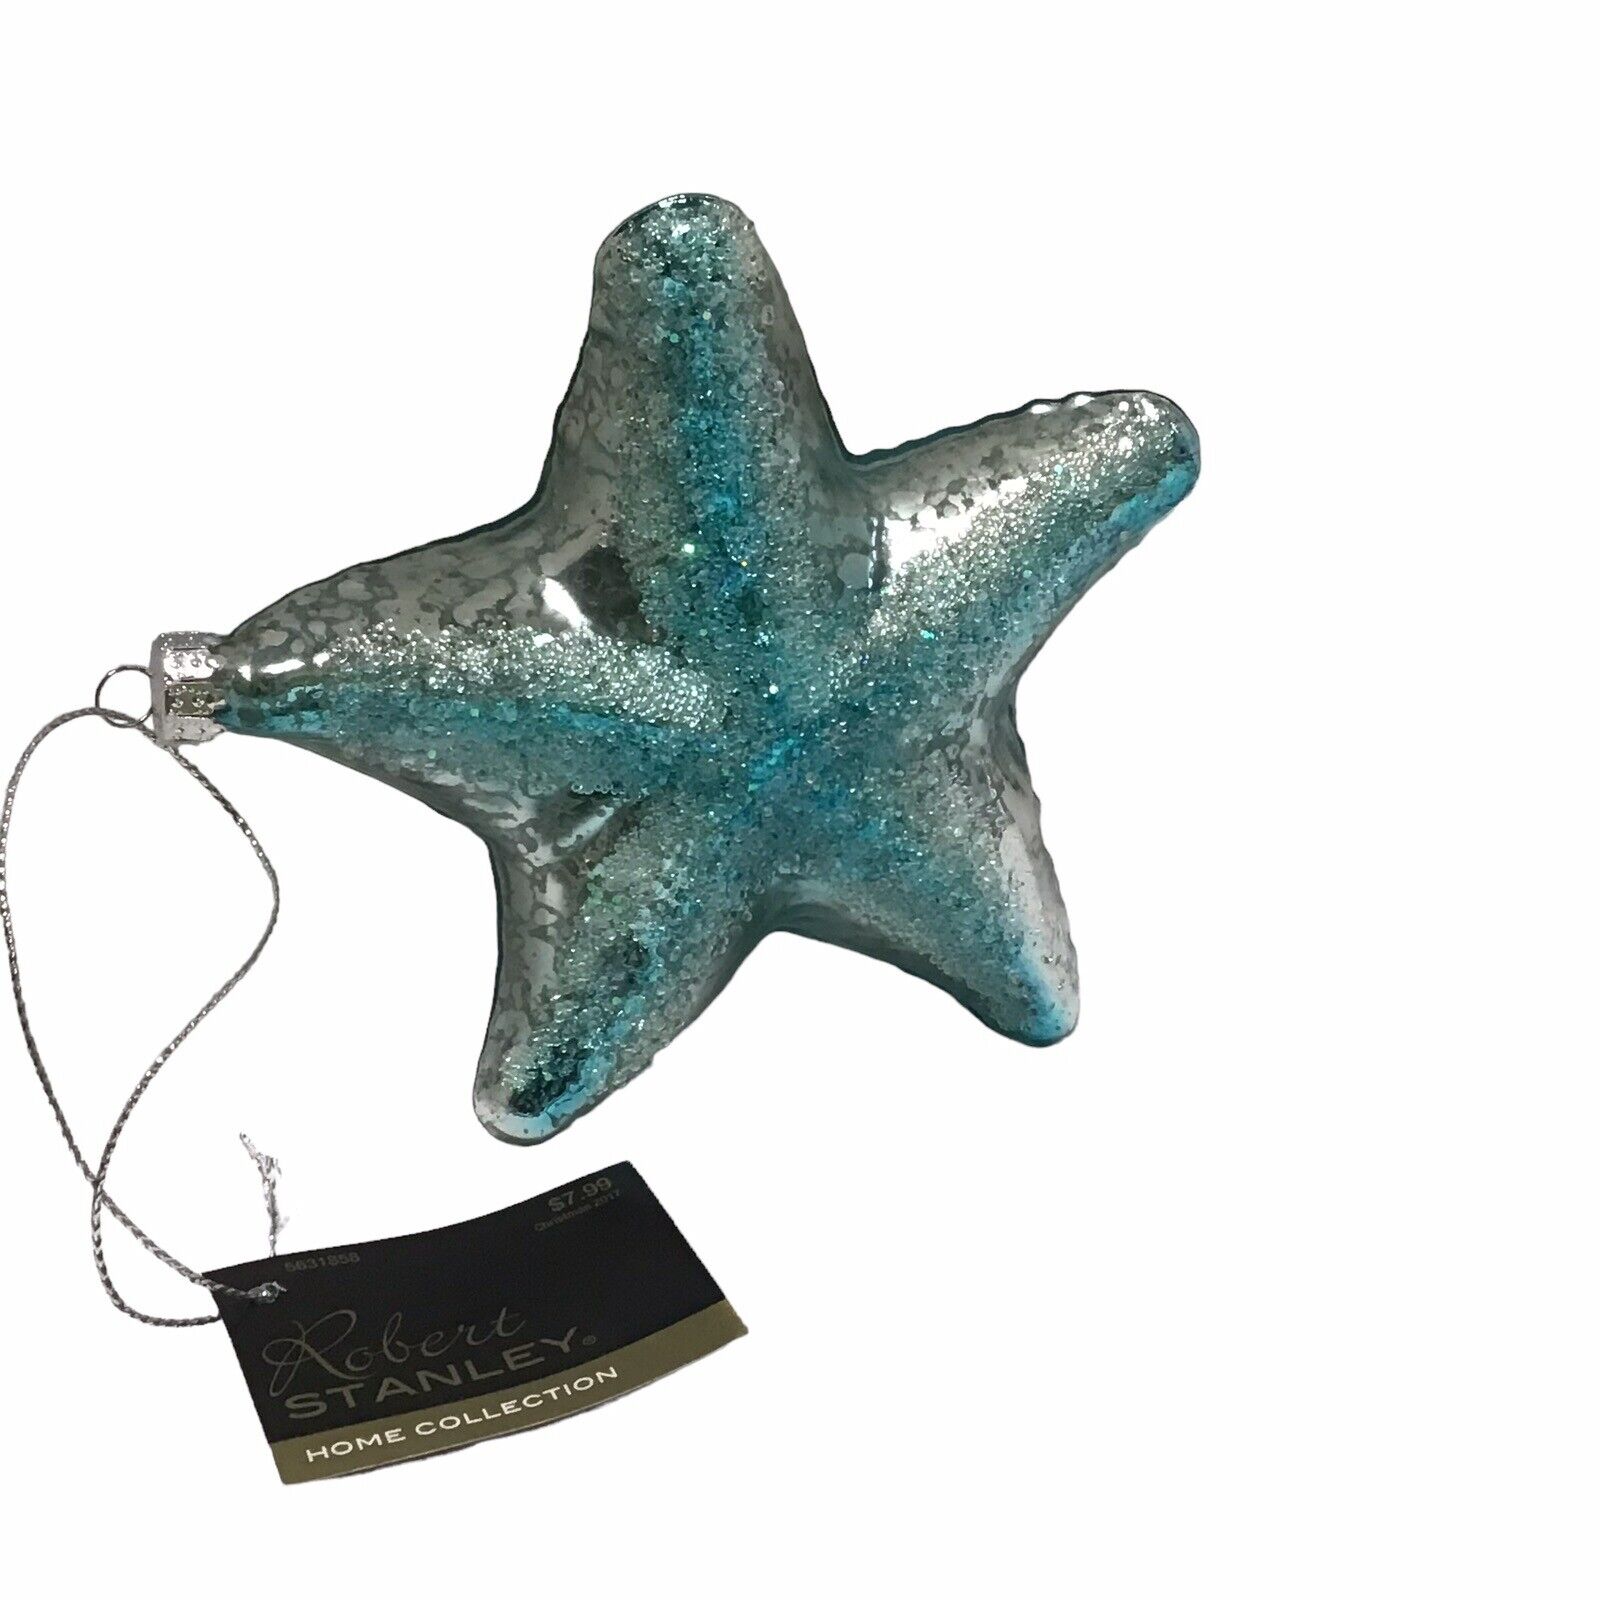 NWT Robert Stanley Starfish Ornament Blown Glass Turquoise Silver Ornament